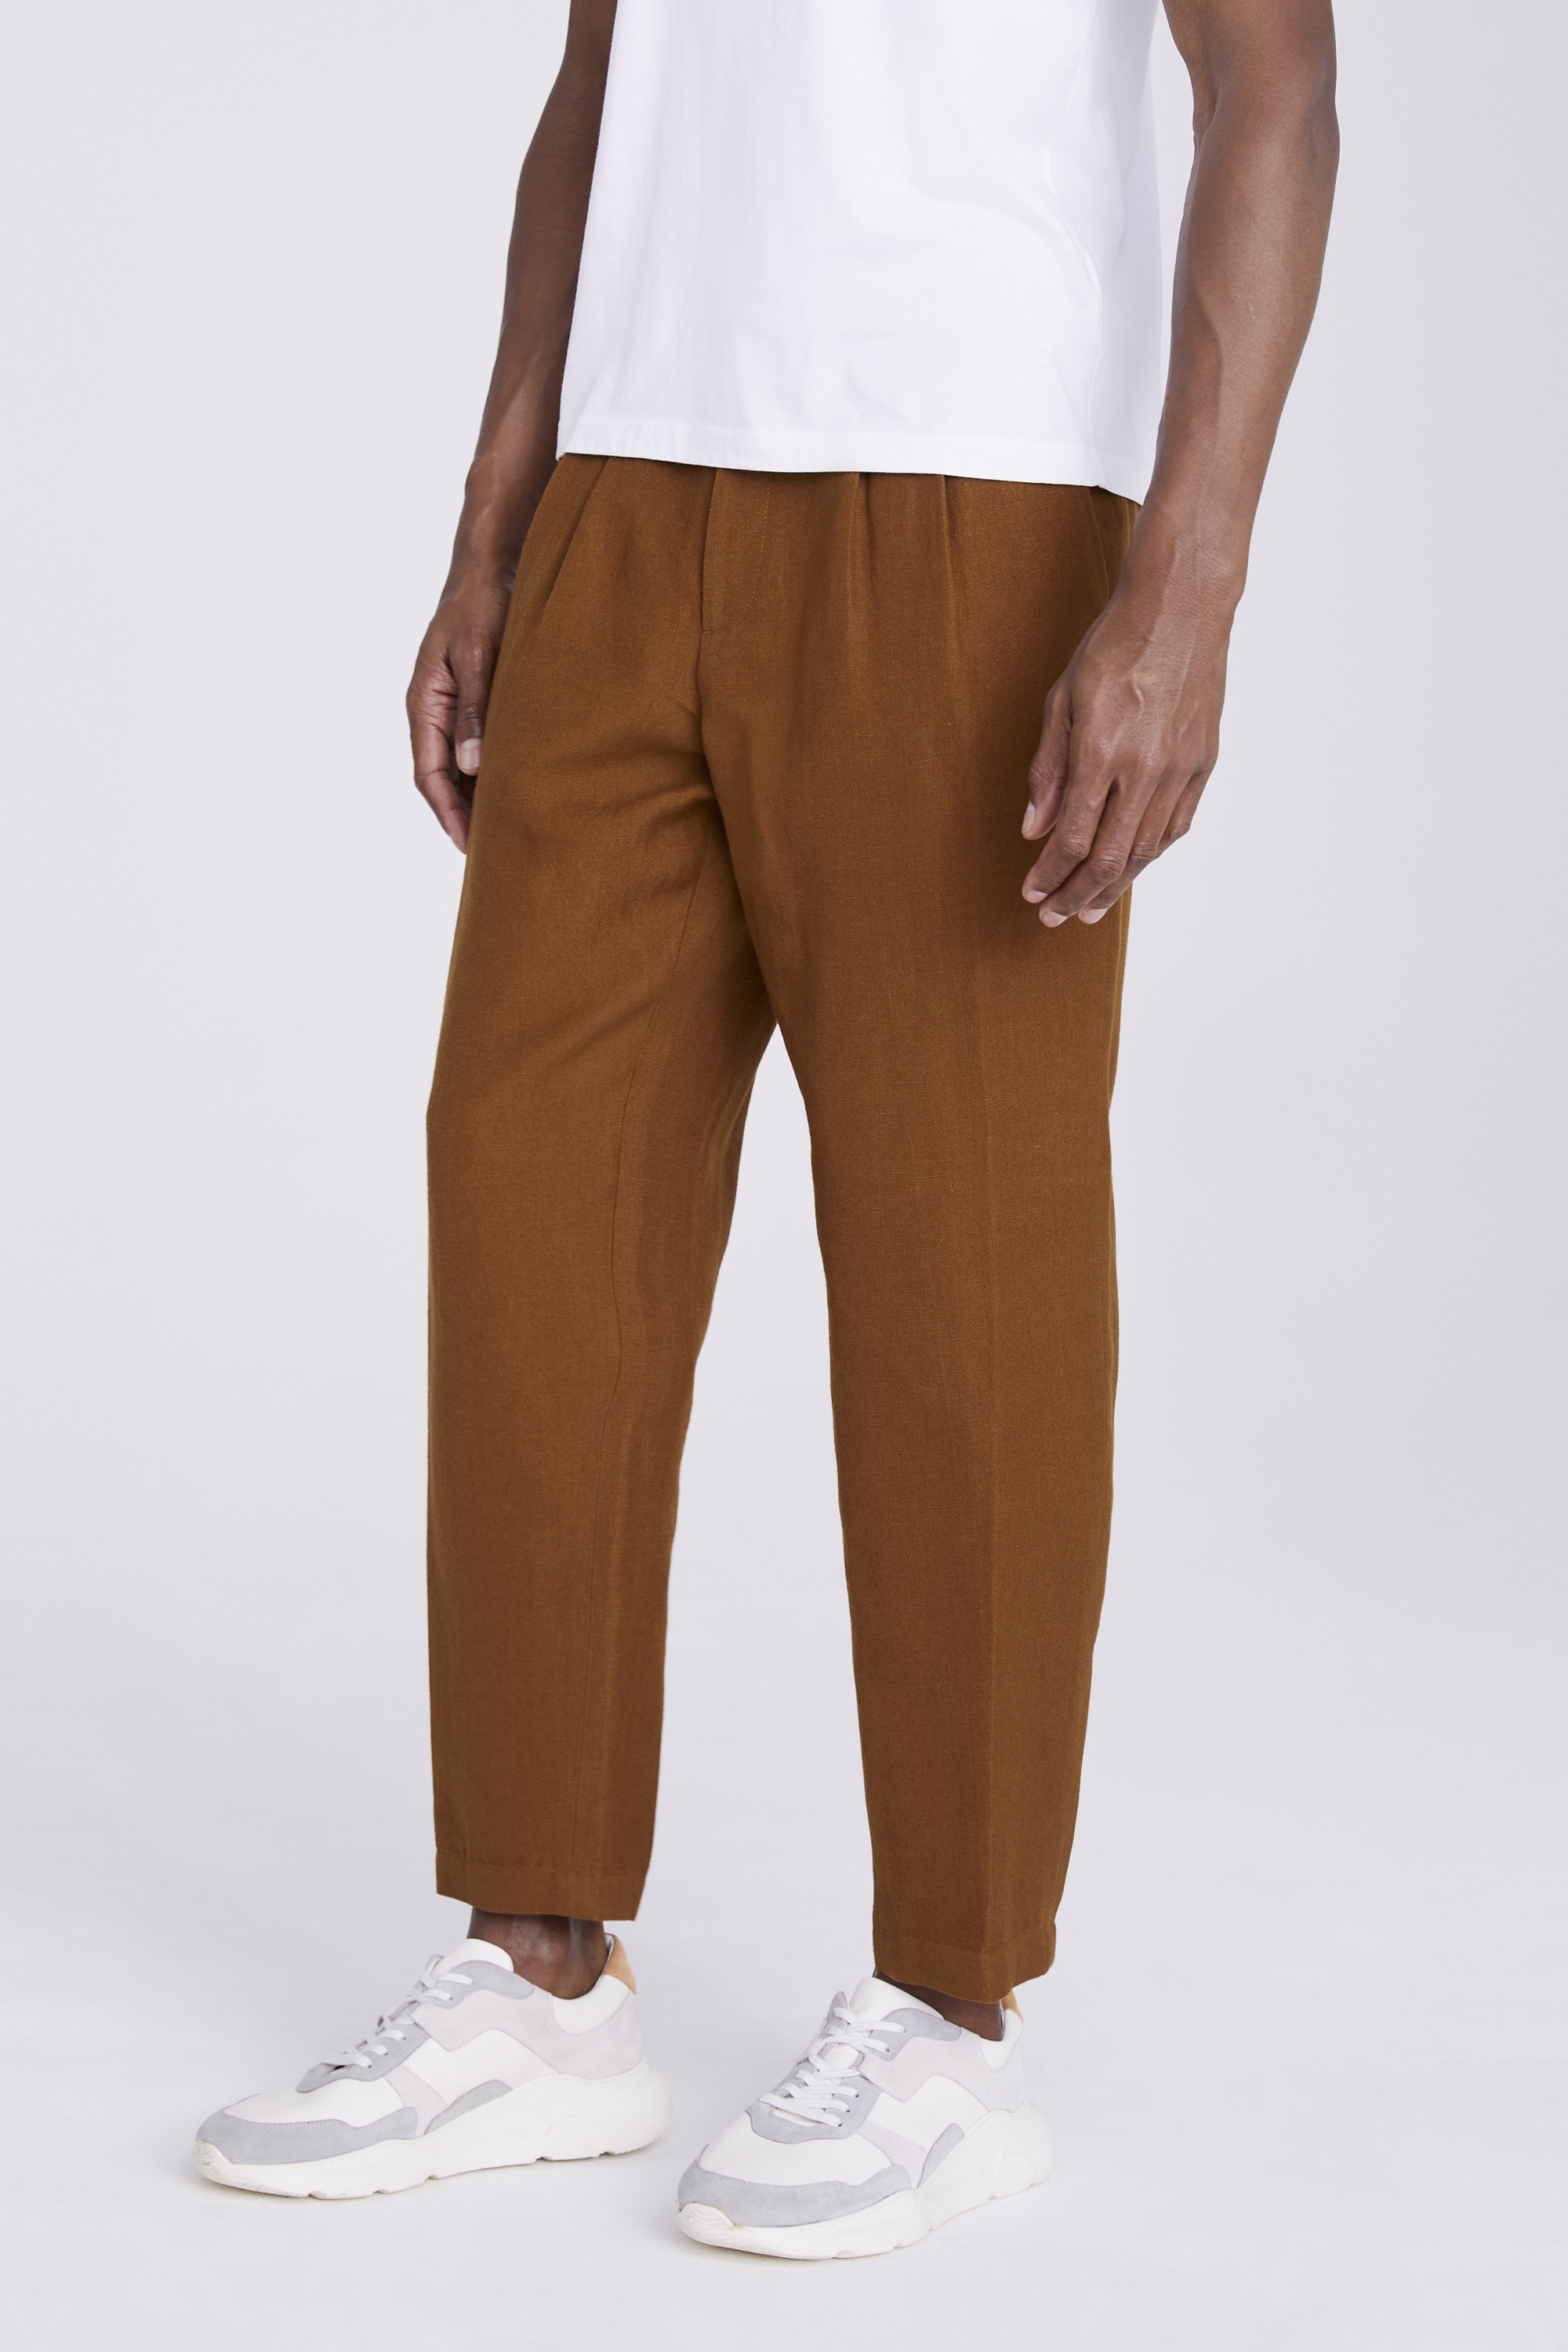 SHEIN Men Floral Taped Carrot Pants